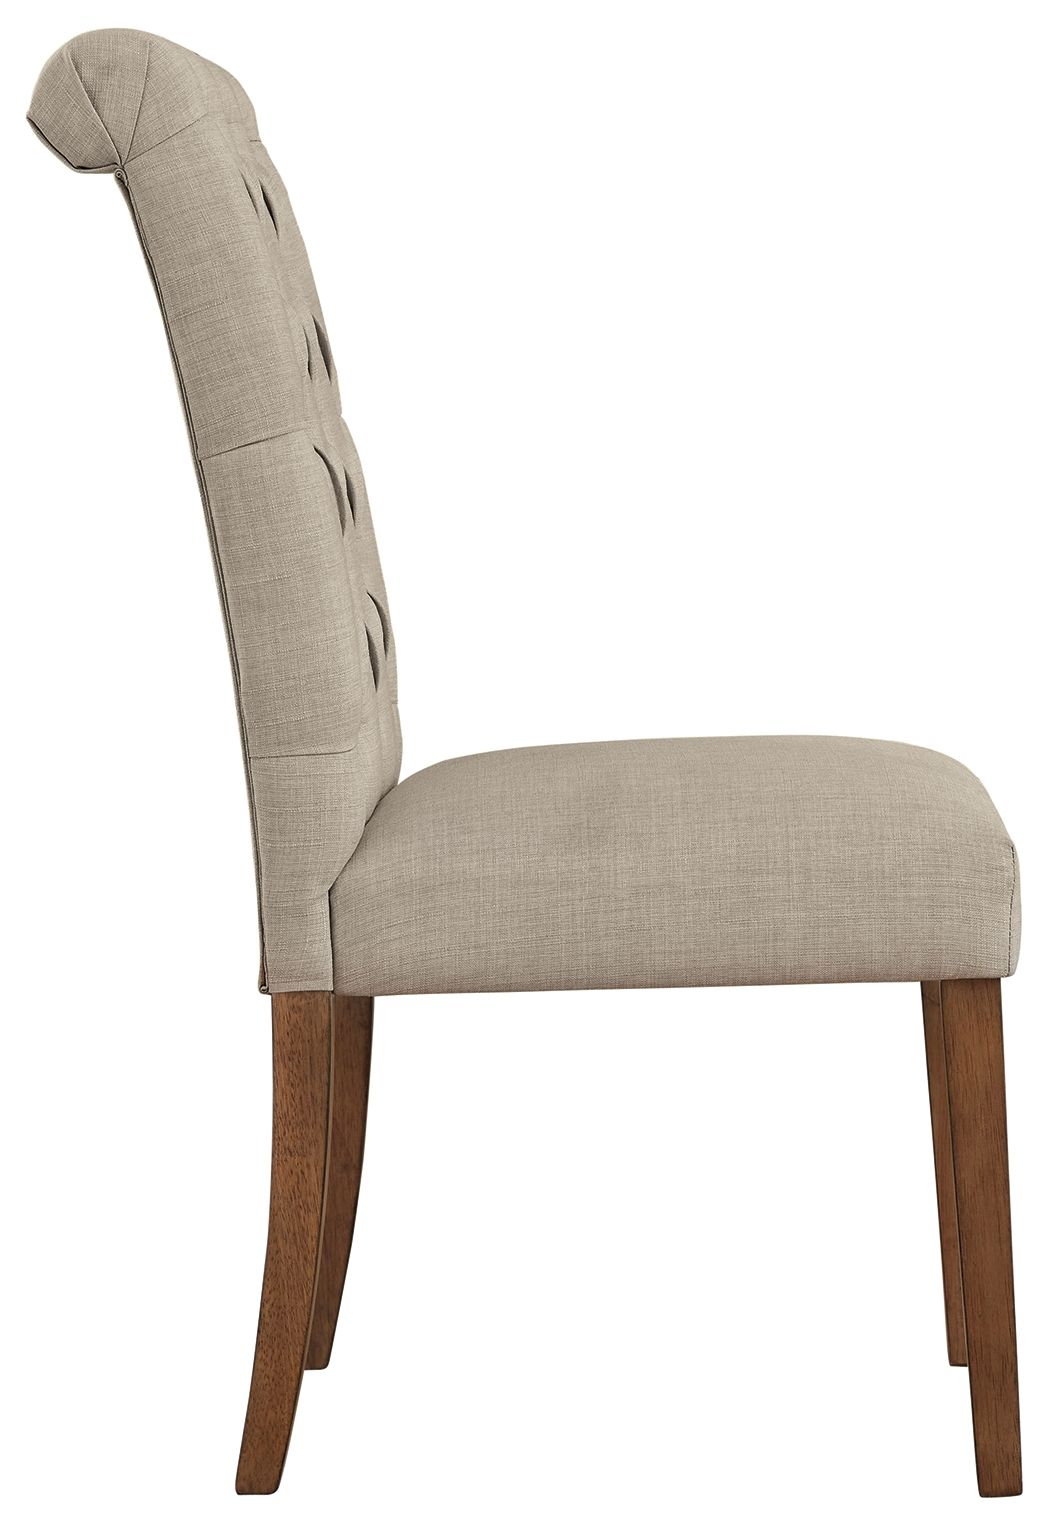 Harvina - Beige - Dining Uph Side Chair (Set of 2)